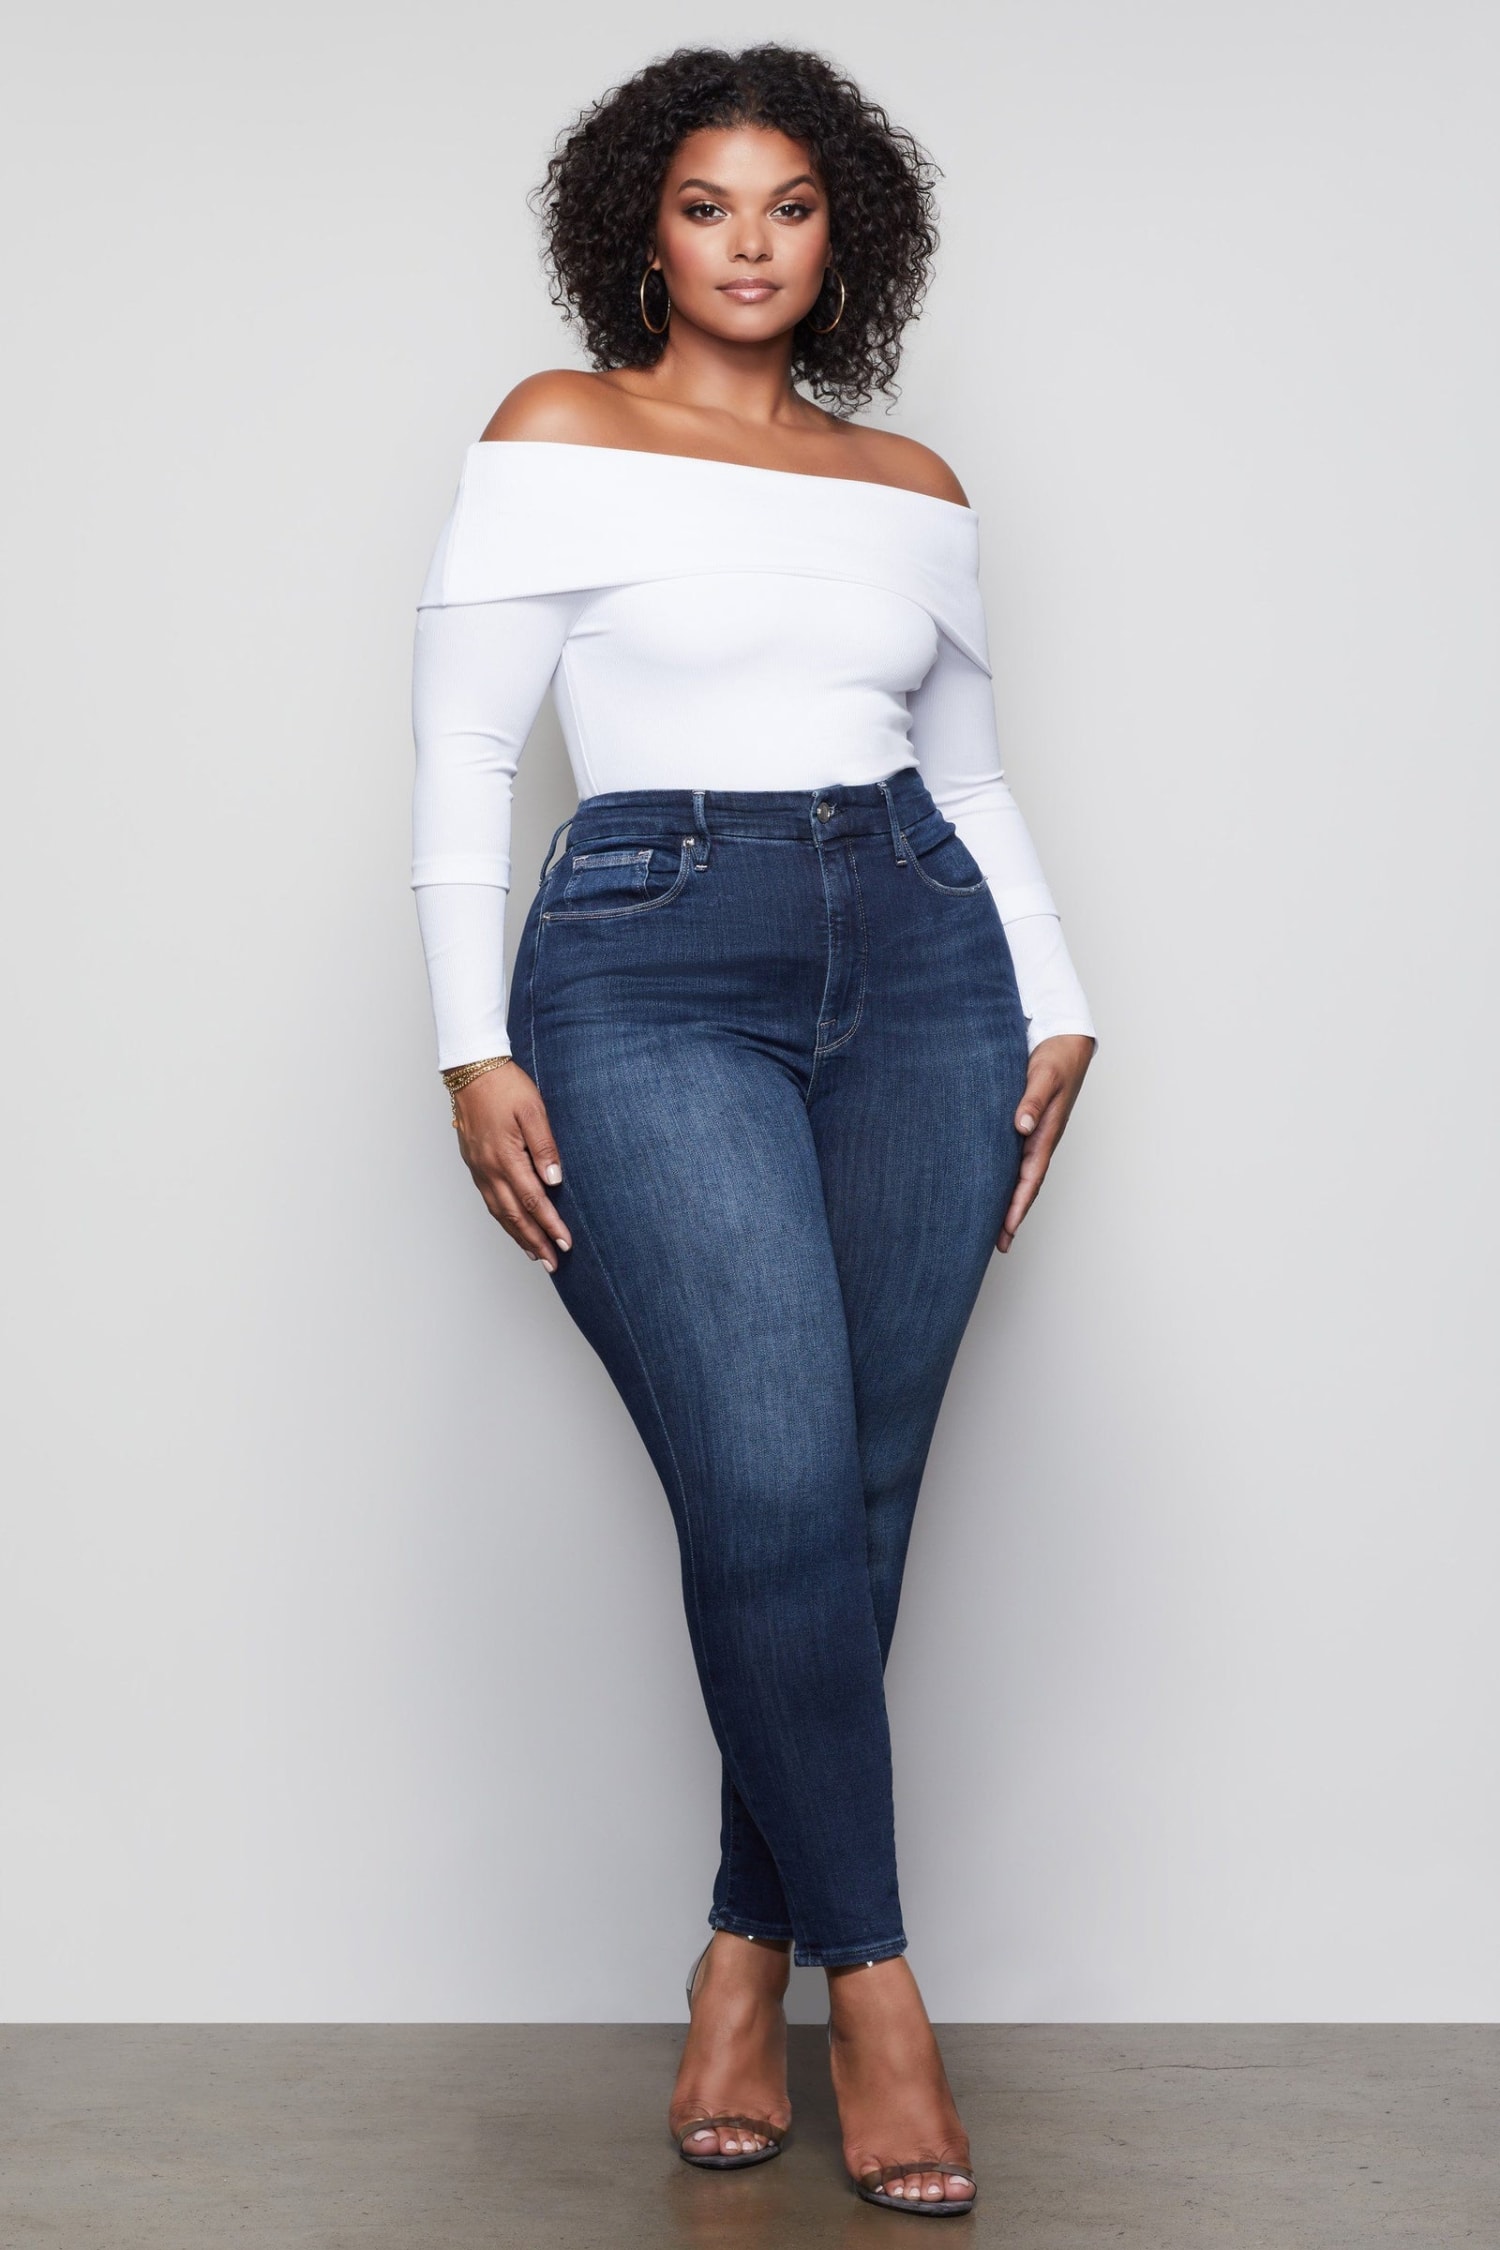 to shop for jeans curvy women, according to stylists